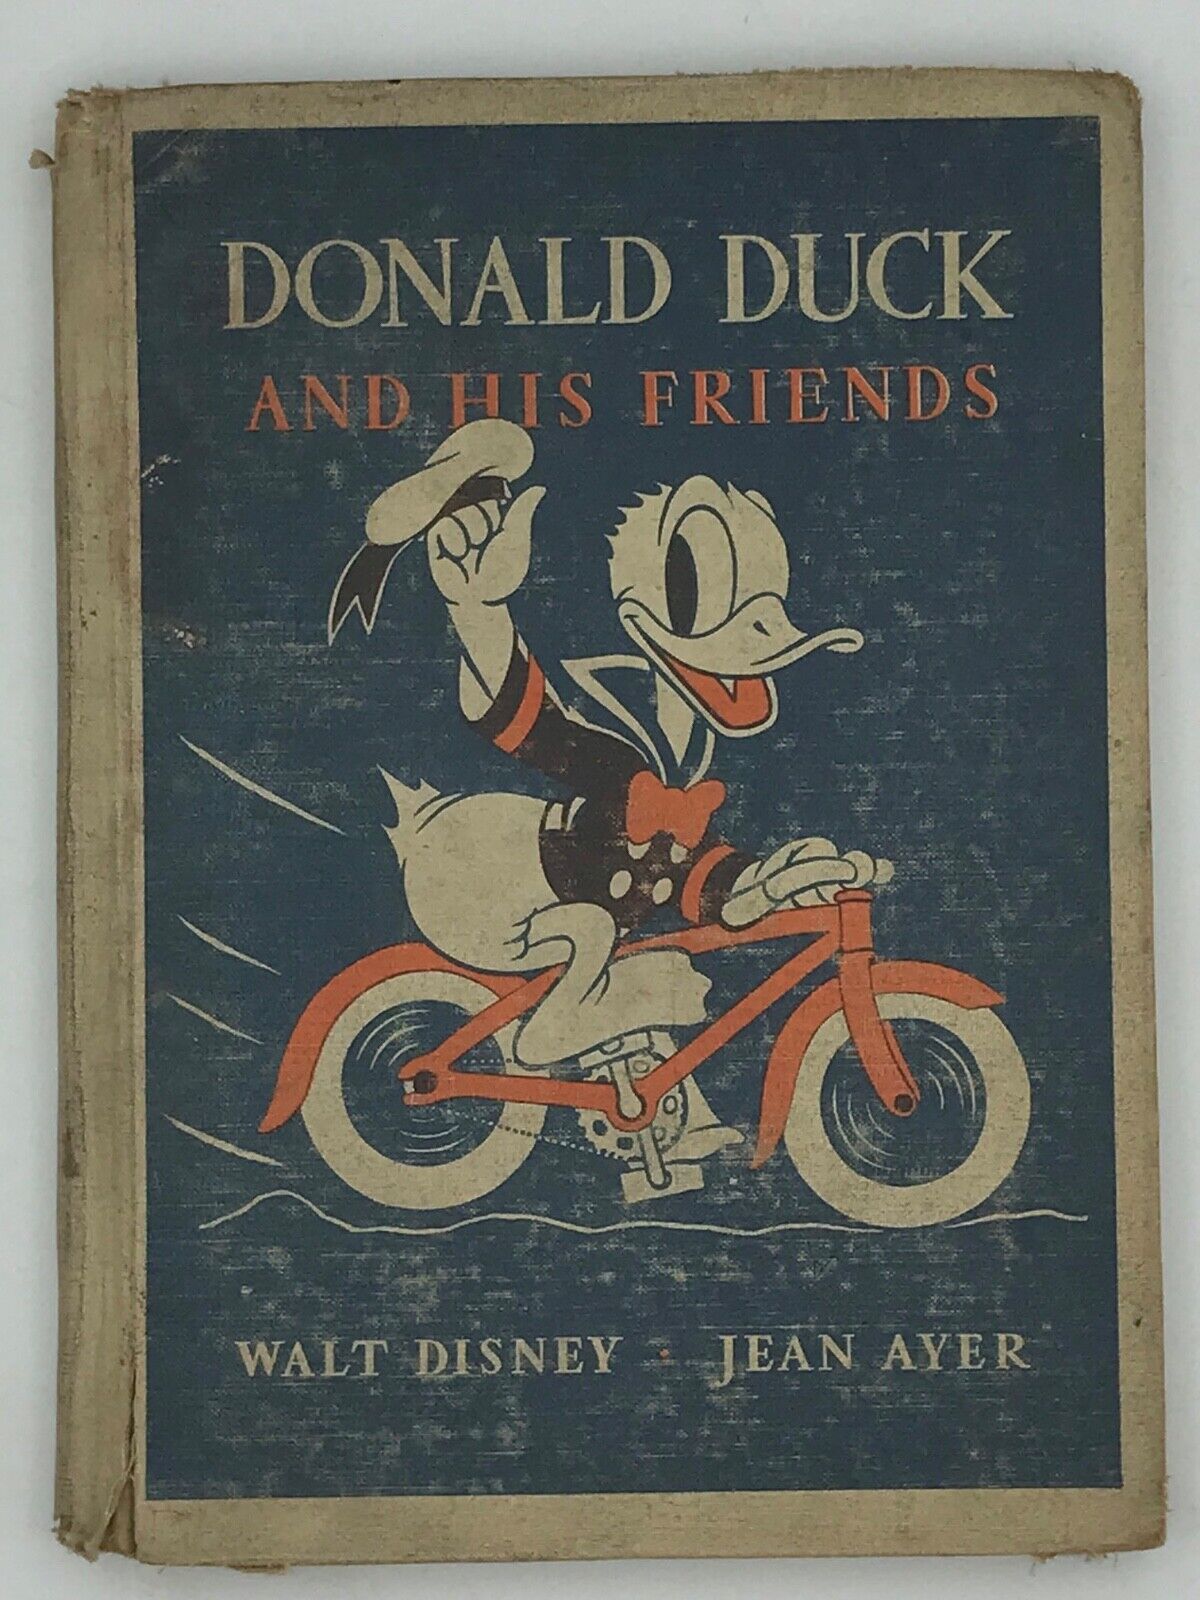 Donald Duck and His Friends by Jean Ayer, Walt Disney Studio- 1939 Hardcover